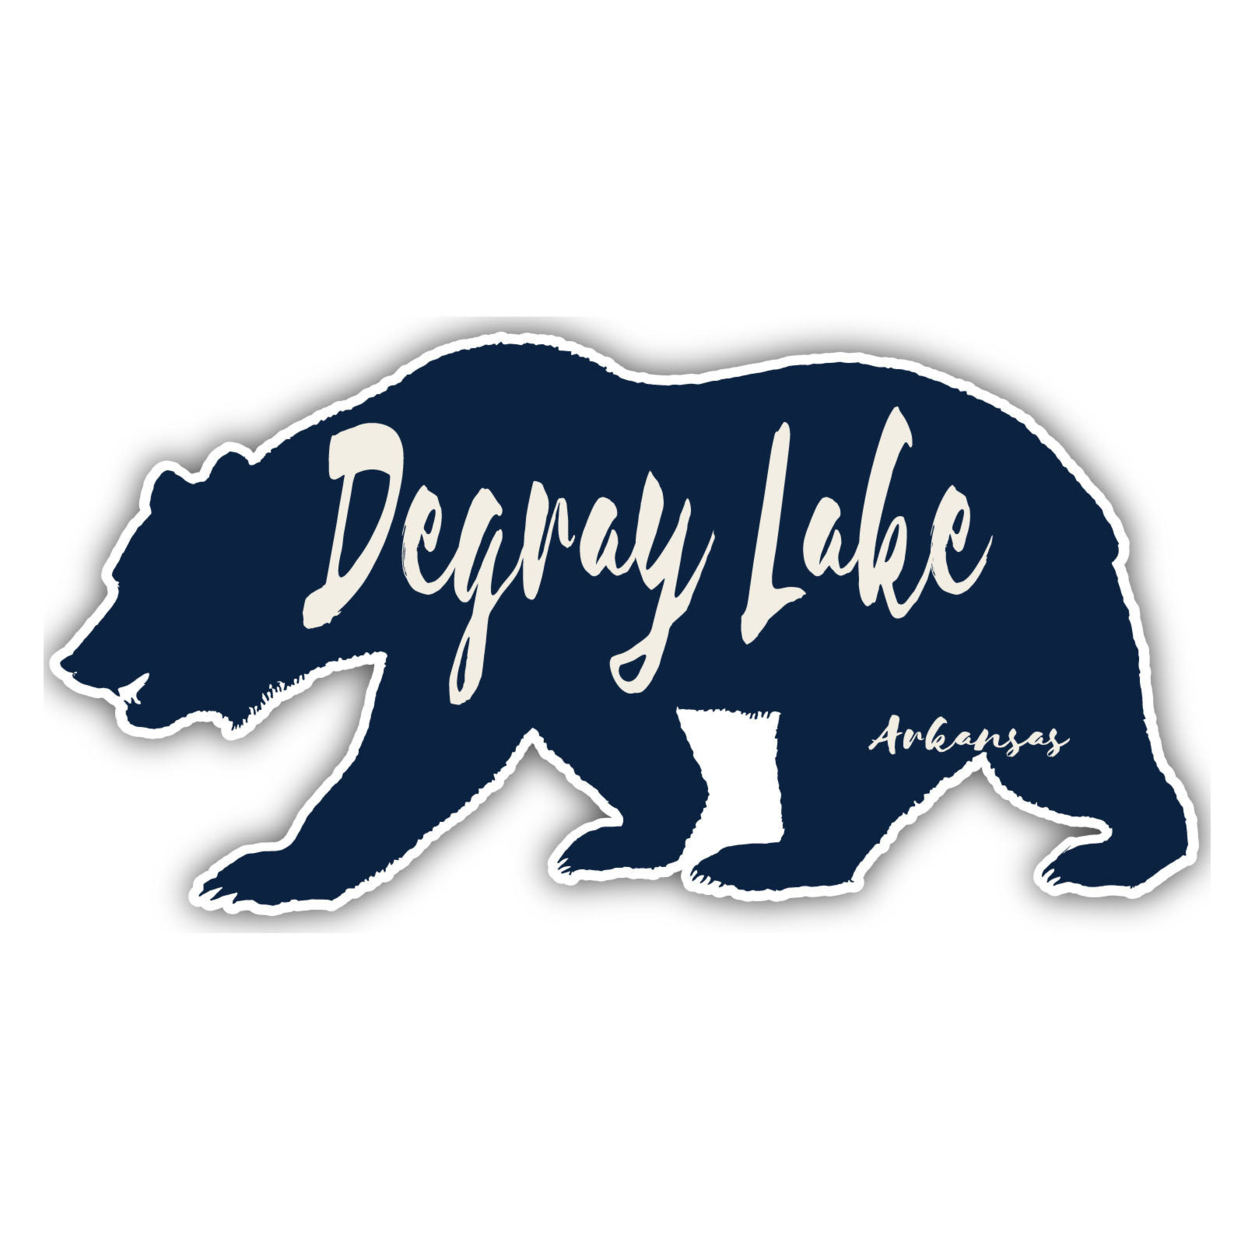 DeGray Lake Arkansas Souvenir Decorative Stickers (Choose Theme And Size) - 4-Pack, 8-Inch, Camp Life